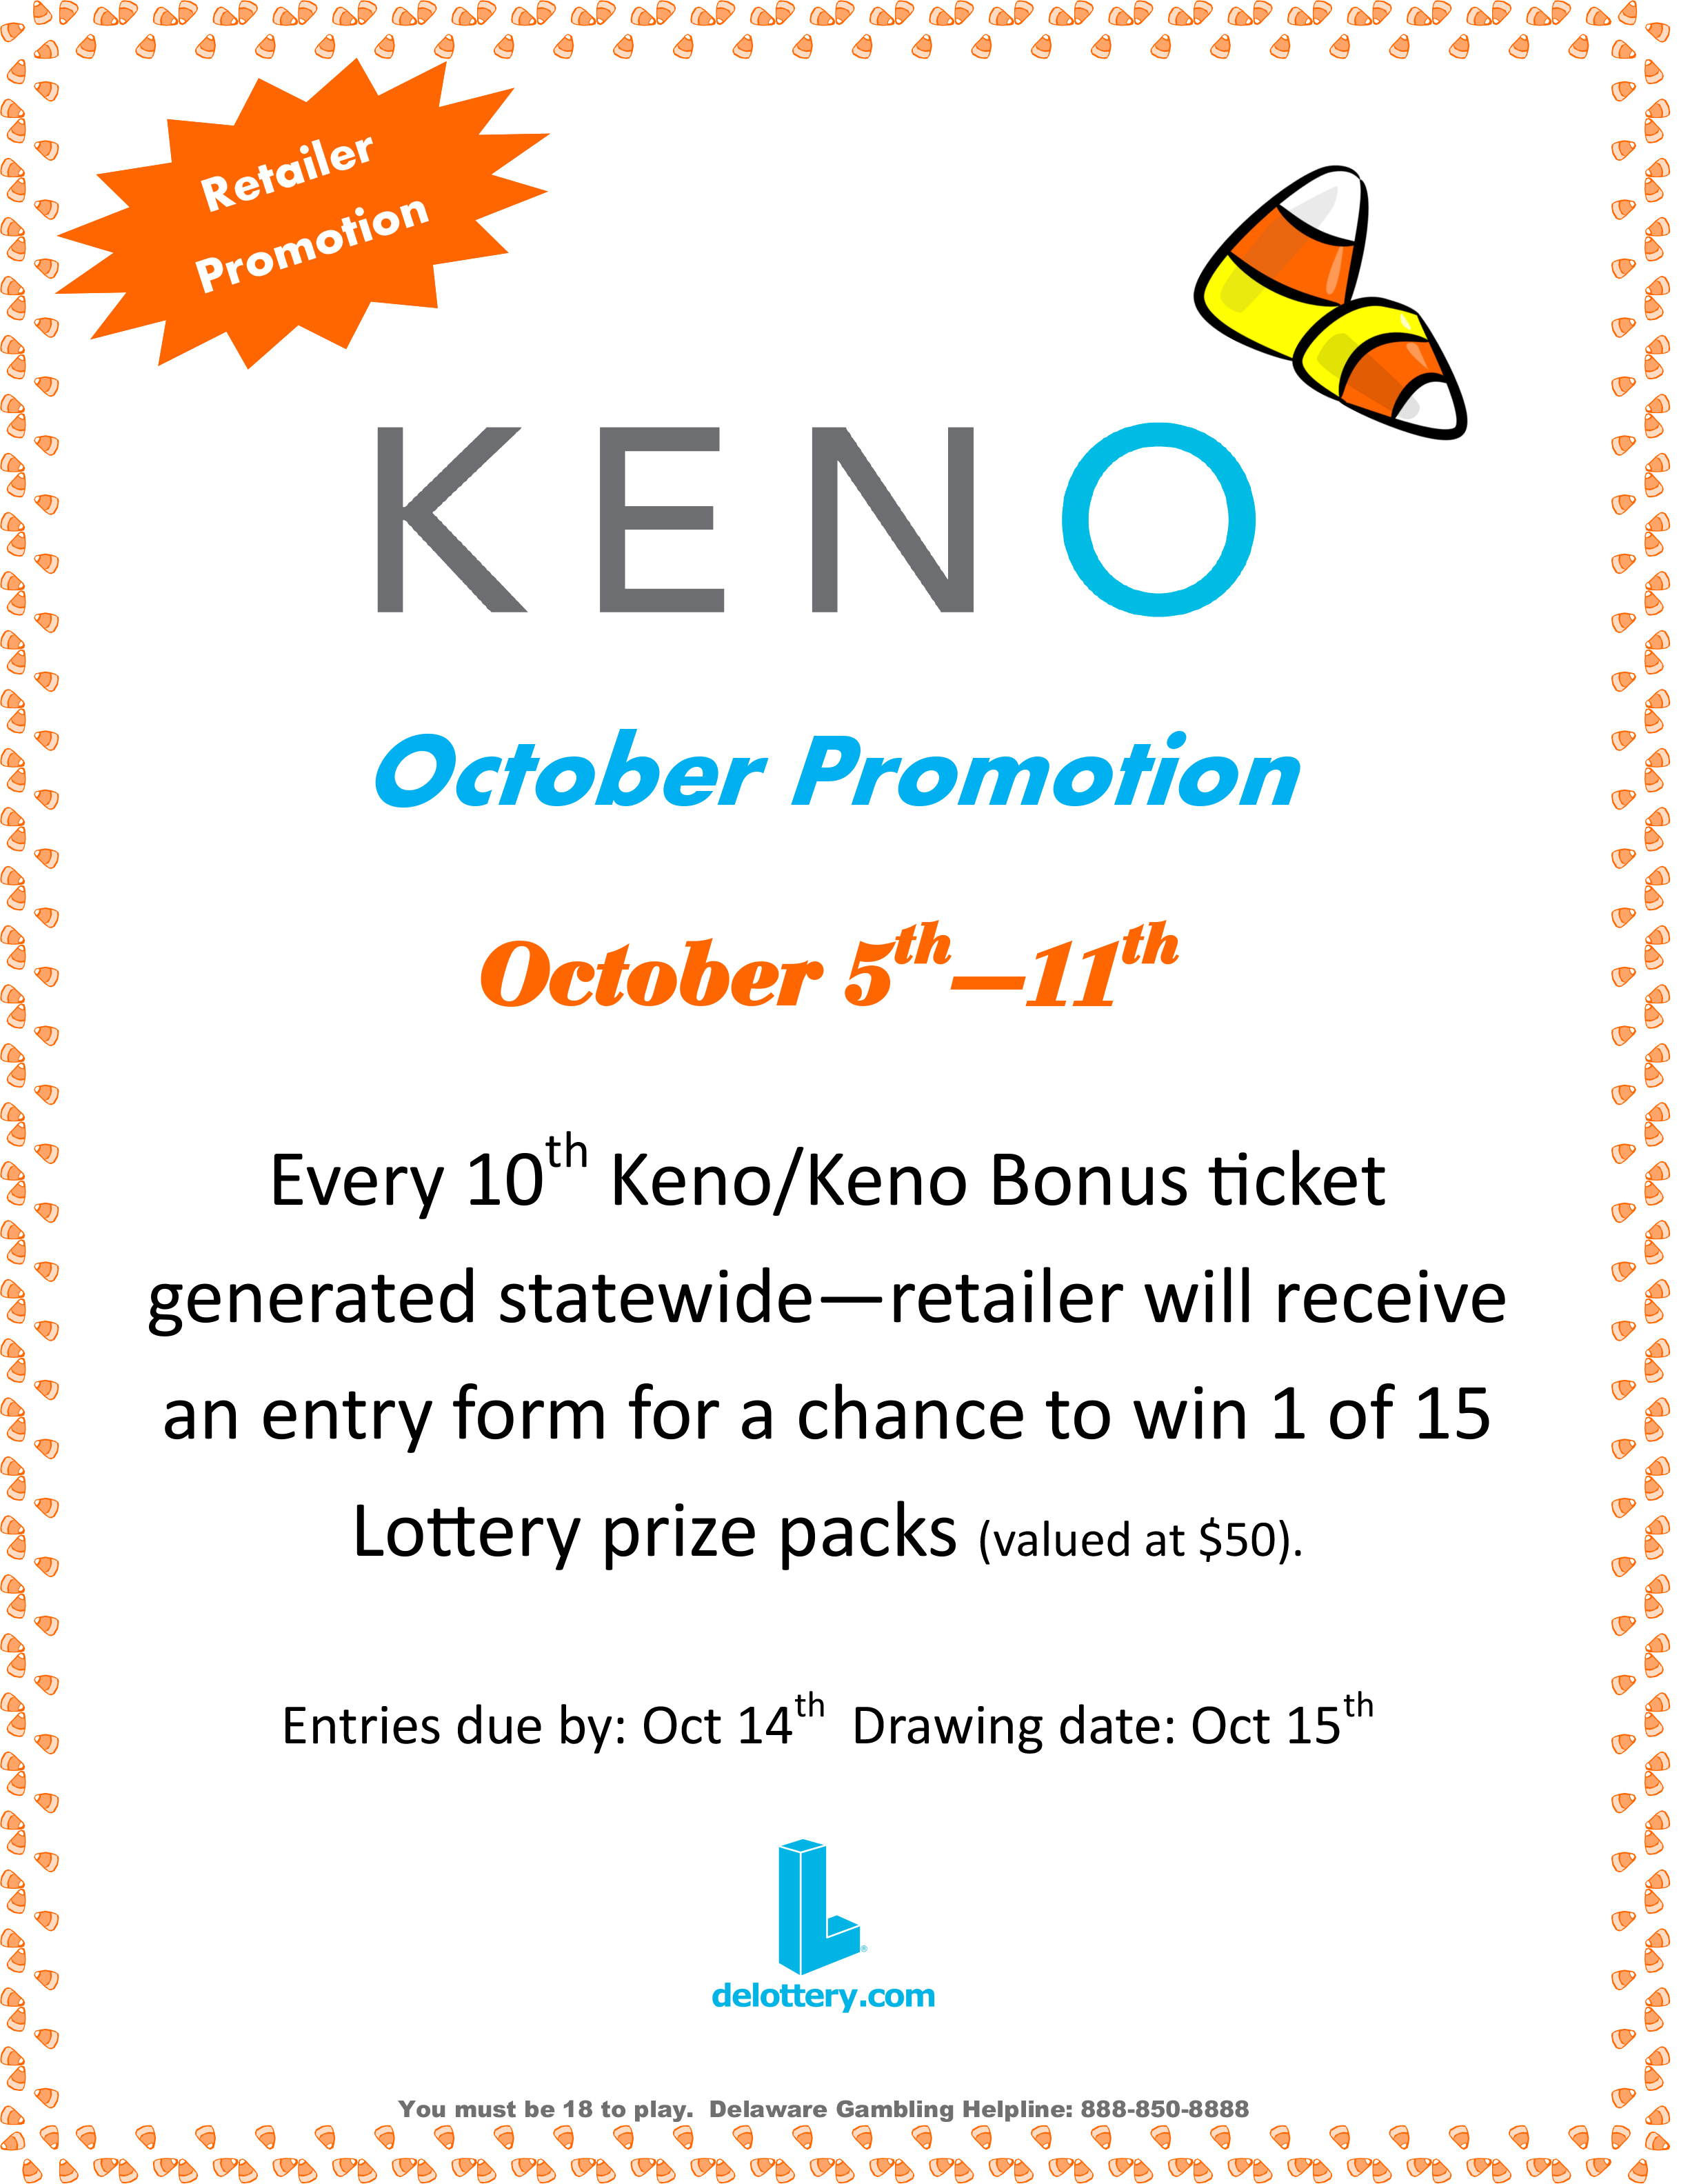 October Promotion. October 5th - 11th. Every 10th Keno/Keno Bonus ticket generated statewide-retailer will receive an entry form for a chance to win 1 of 15 Lottery prize packs (valued at $50) Entries due by Oct 14th. Drawing date Oct 15th. Must be 18 to play.